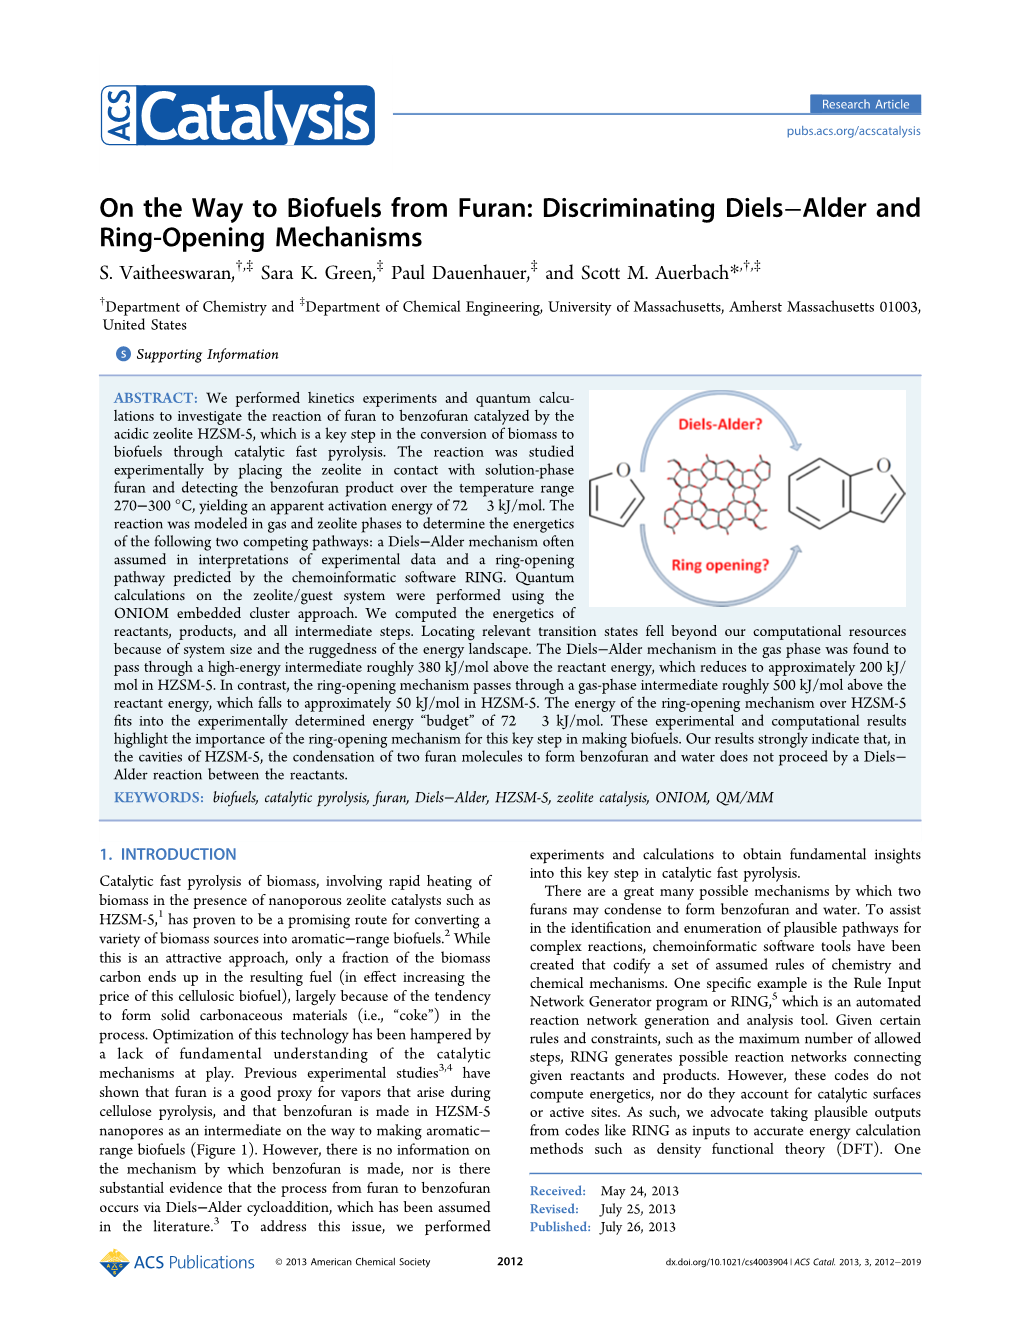 On the Way to Biofuels from Furan: Discriminating Diels−Alder and Ring-Opening Mechanisms S